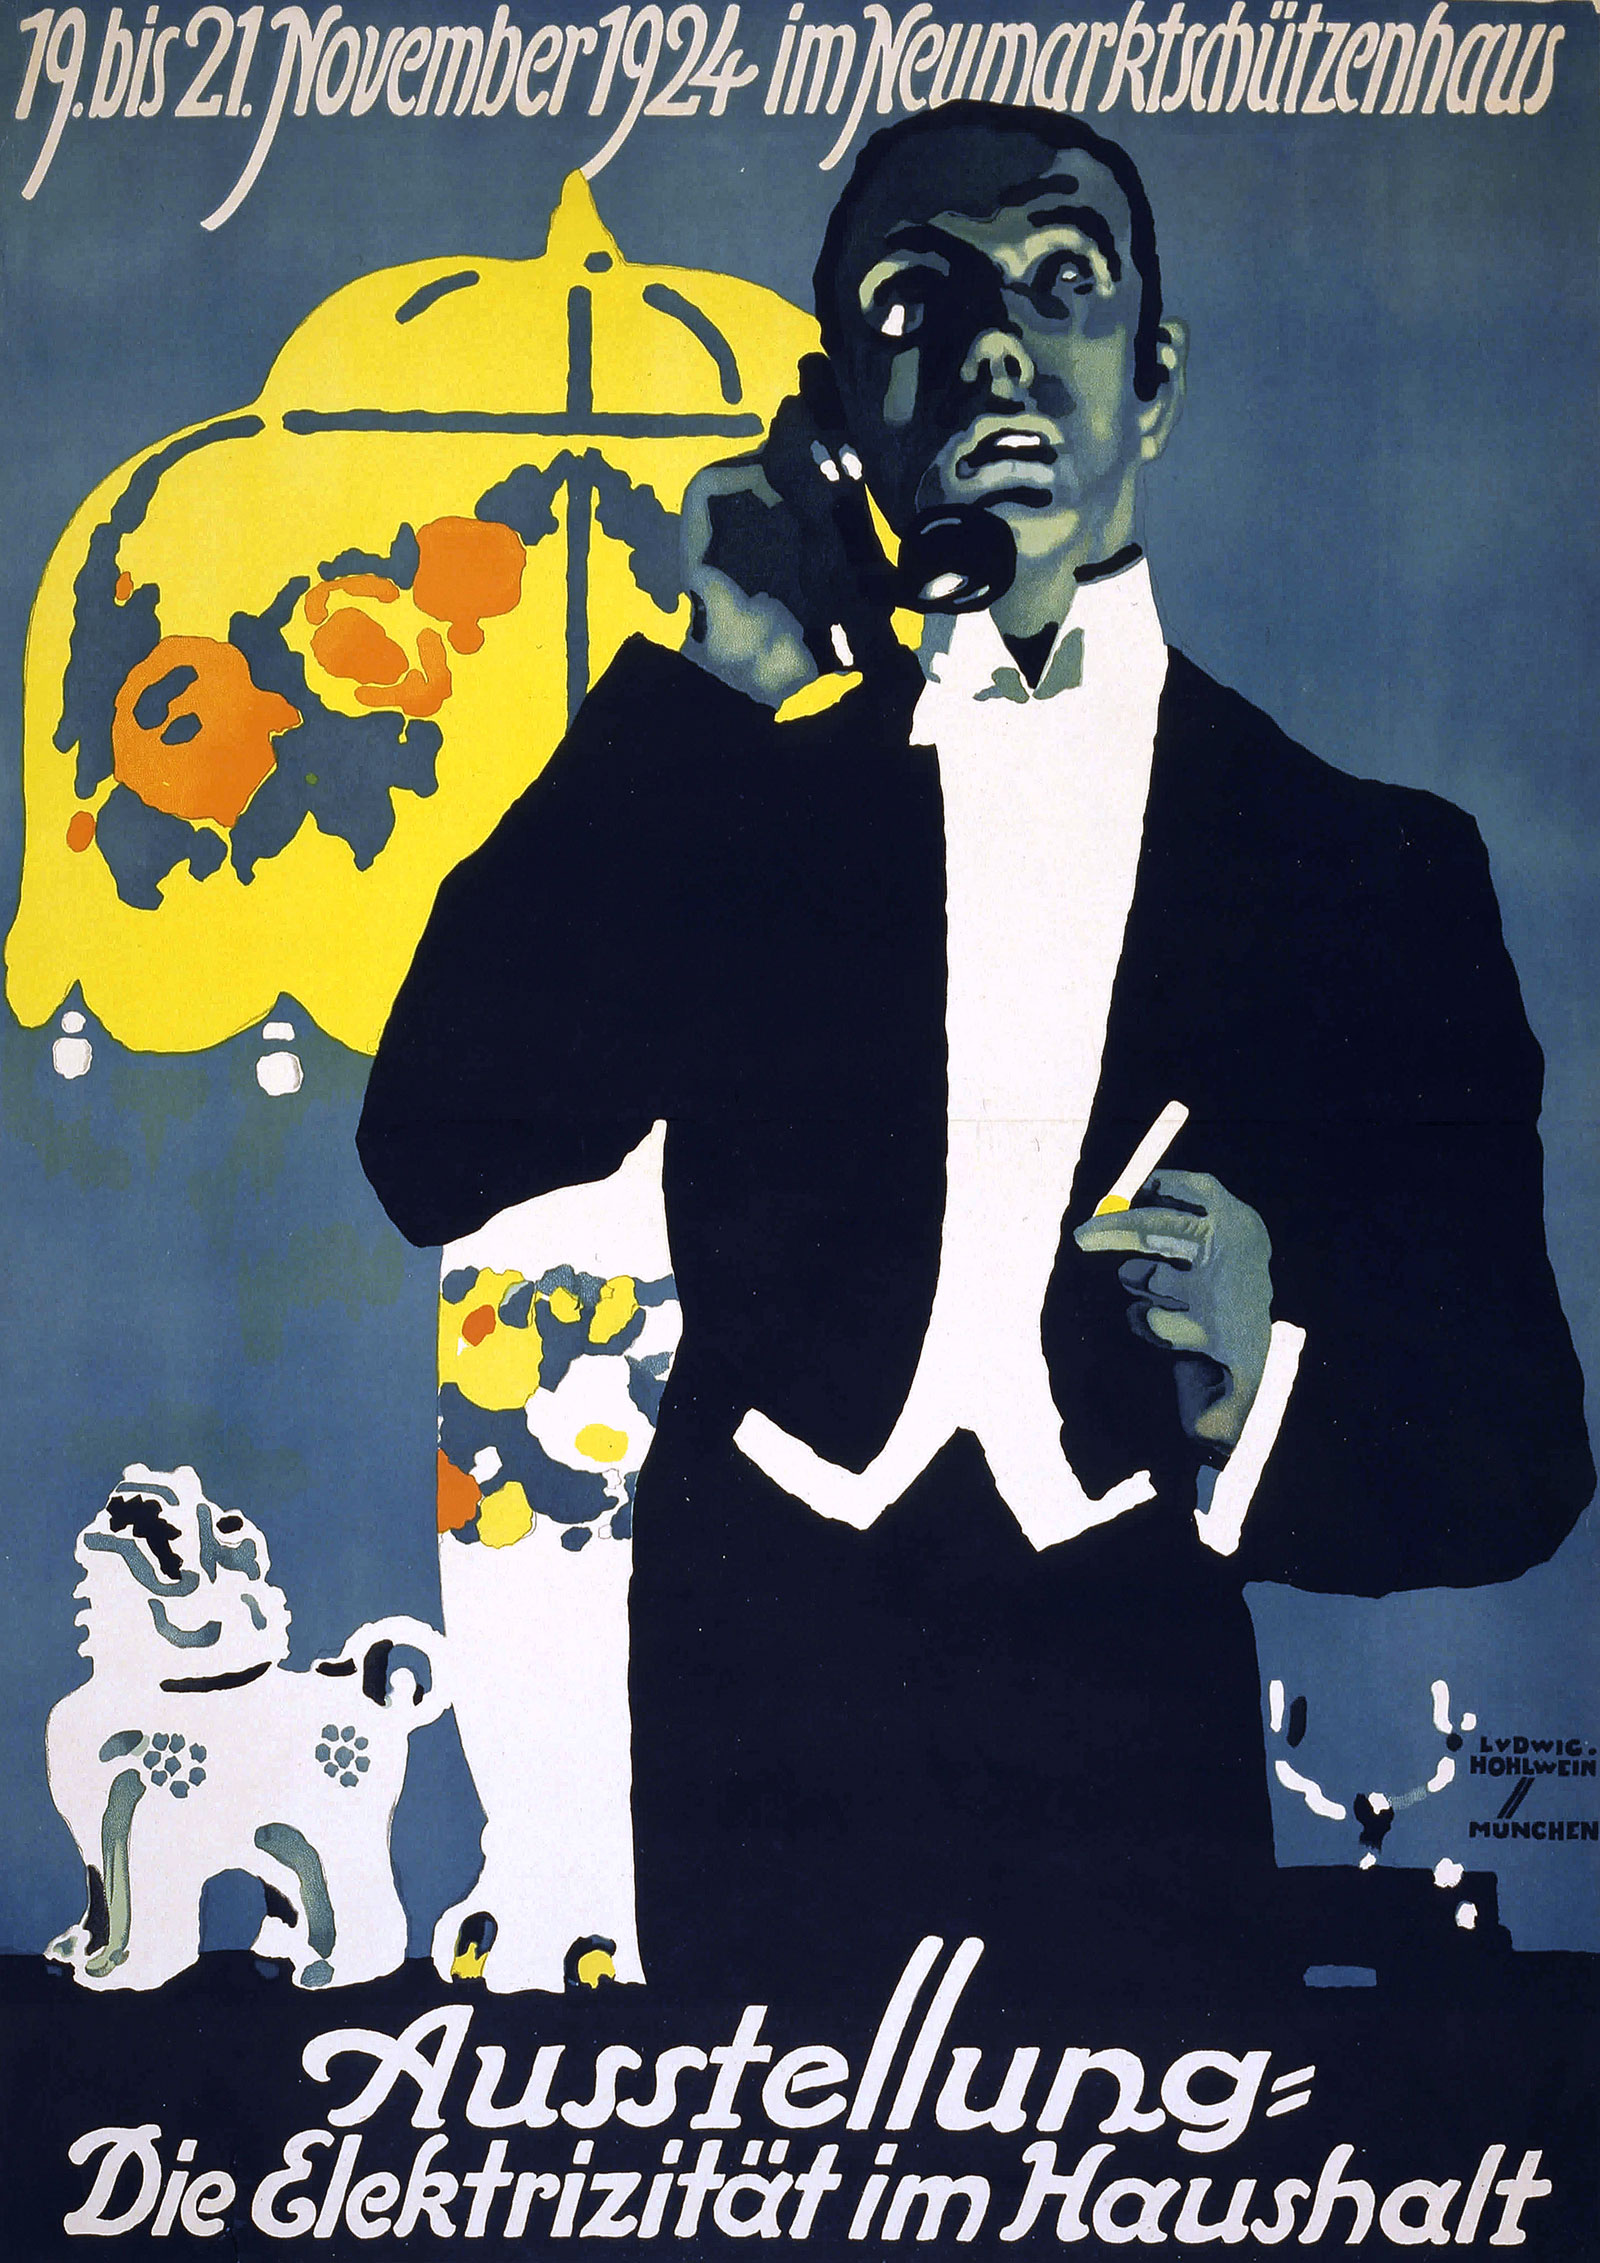 Poster showing a man using a telephone